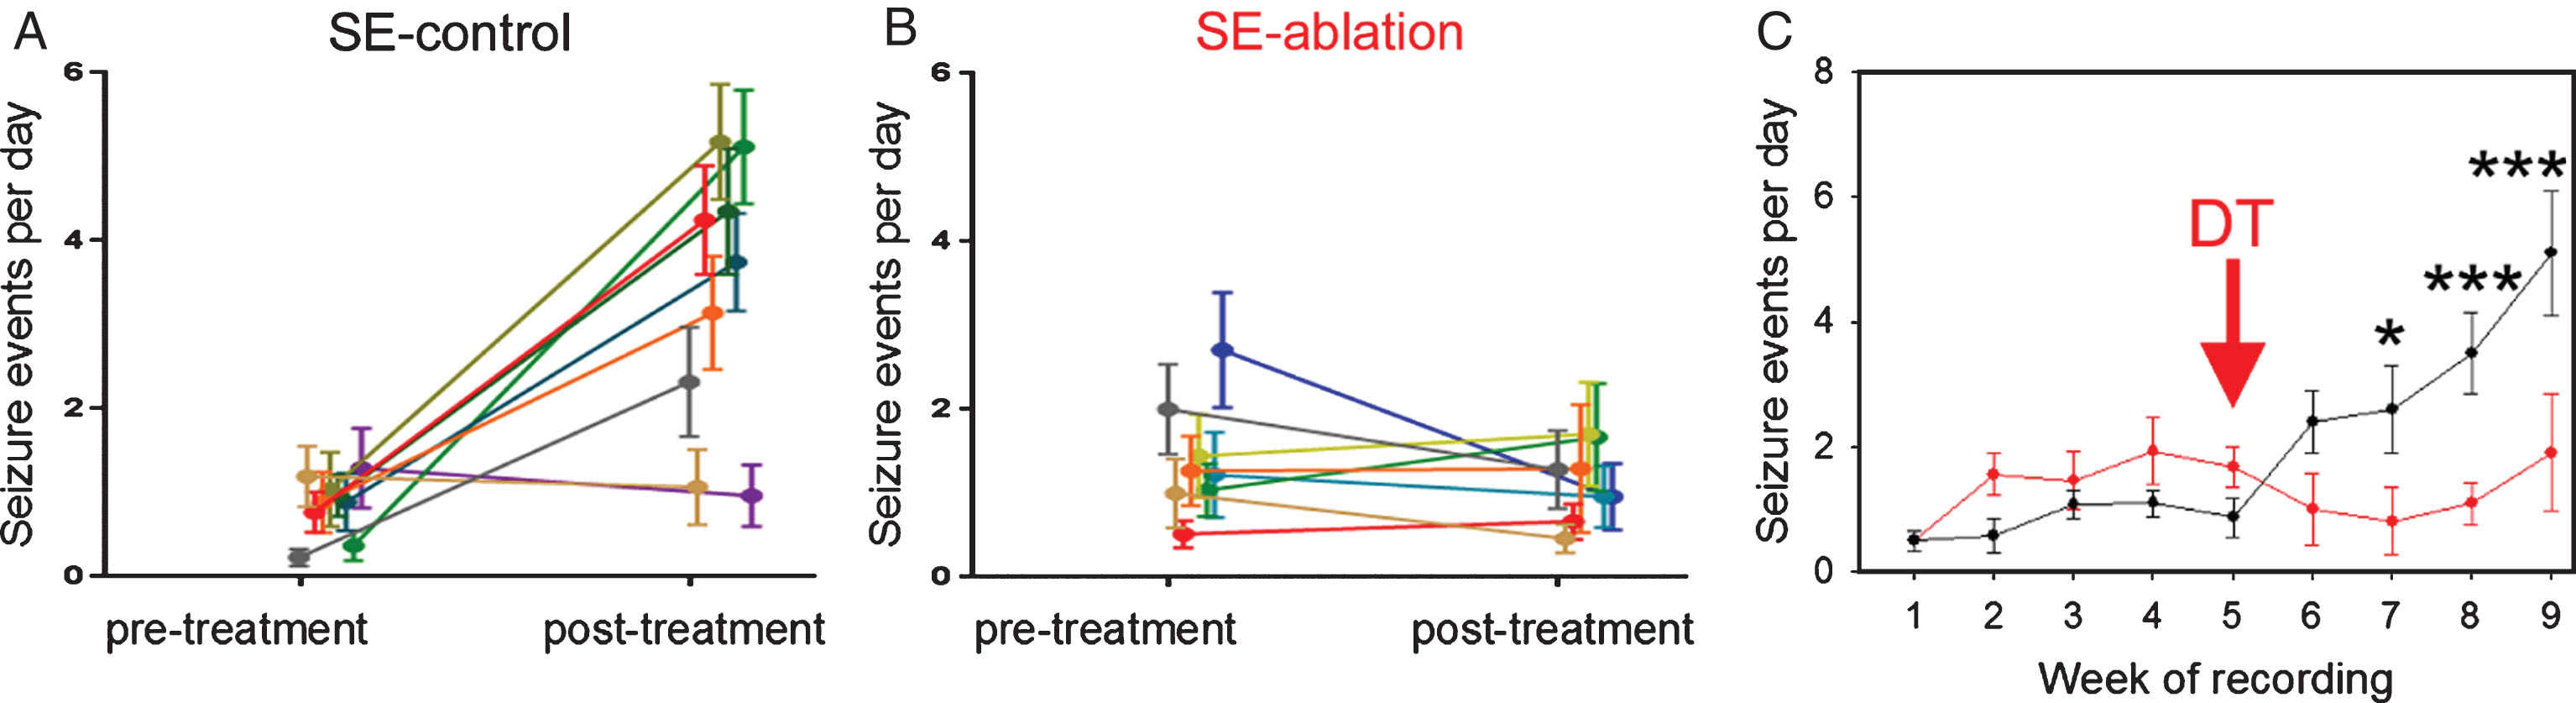 Cell ablation treatment blocks epilepsy progression. Nestin-CreERT2, DTrfl/fl mice were generated to induce expression of the diphtheria toxin receptor among newborn granule cells. Epilepsy was induced using the pilocarpine status epilepticus model. Following one month of 24/7 video-EEG monitoring, animals were treated with saline (SE-control) or diphtheria toxin (SE-ablation). Pre-treatment and post-treatment seizure frequencies (A,B) are shown for SE-control mice (left, black) and SE-ablation mice (middle, red). Each line shows the means±SEM for one animal. (C) Average number of seizure events during each week of recording for SE-control (black) and SE-ablation (red) groups (DT was given during week 5, red arrow). Ablation treatment prevented the dramatic increase in seizure frequency evident in SE-control animals. *p < 0.05, ***p < 0.001.